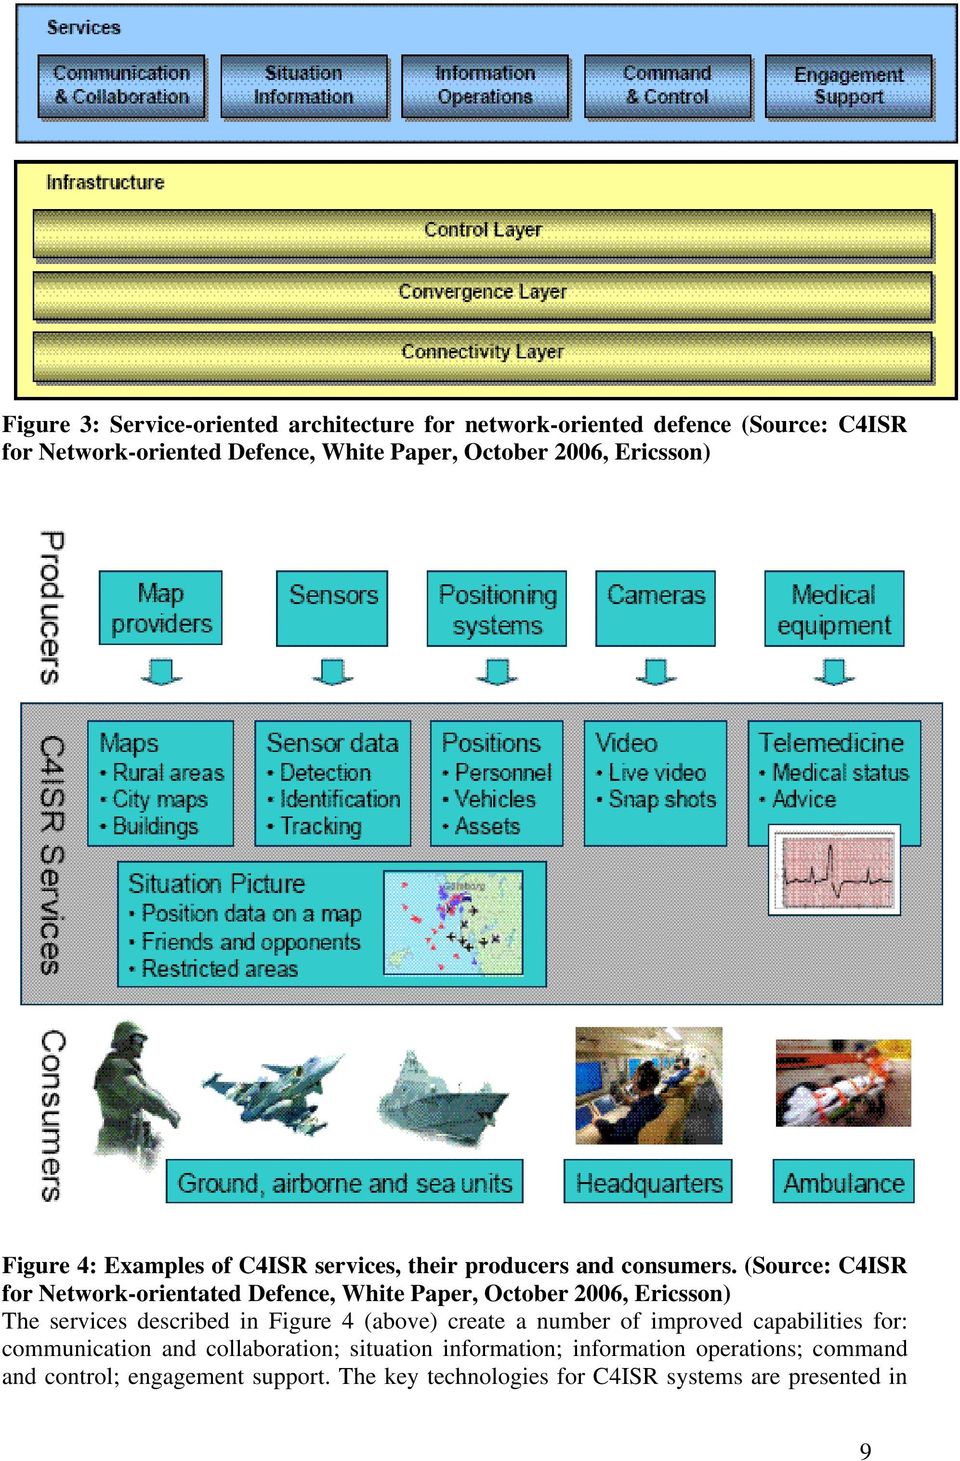 (Source: C4ISR for Network-orientated Defence, White Paper, October 2006, Ericsson) The services described in Figure 4 (above) create a number